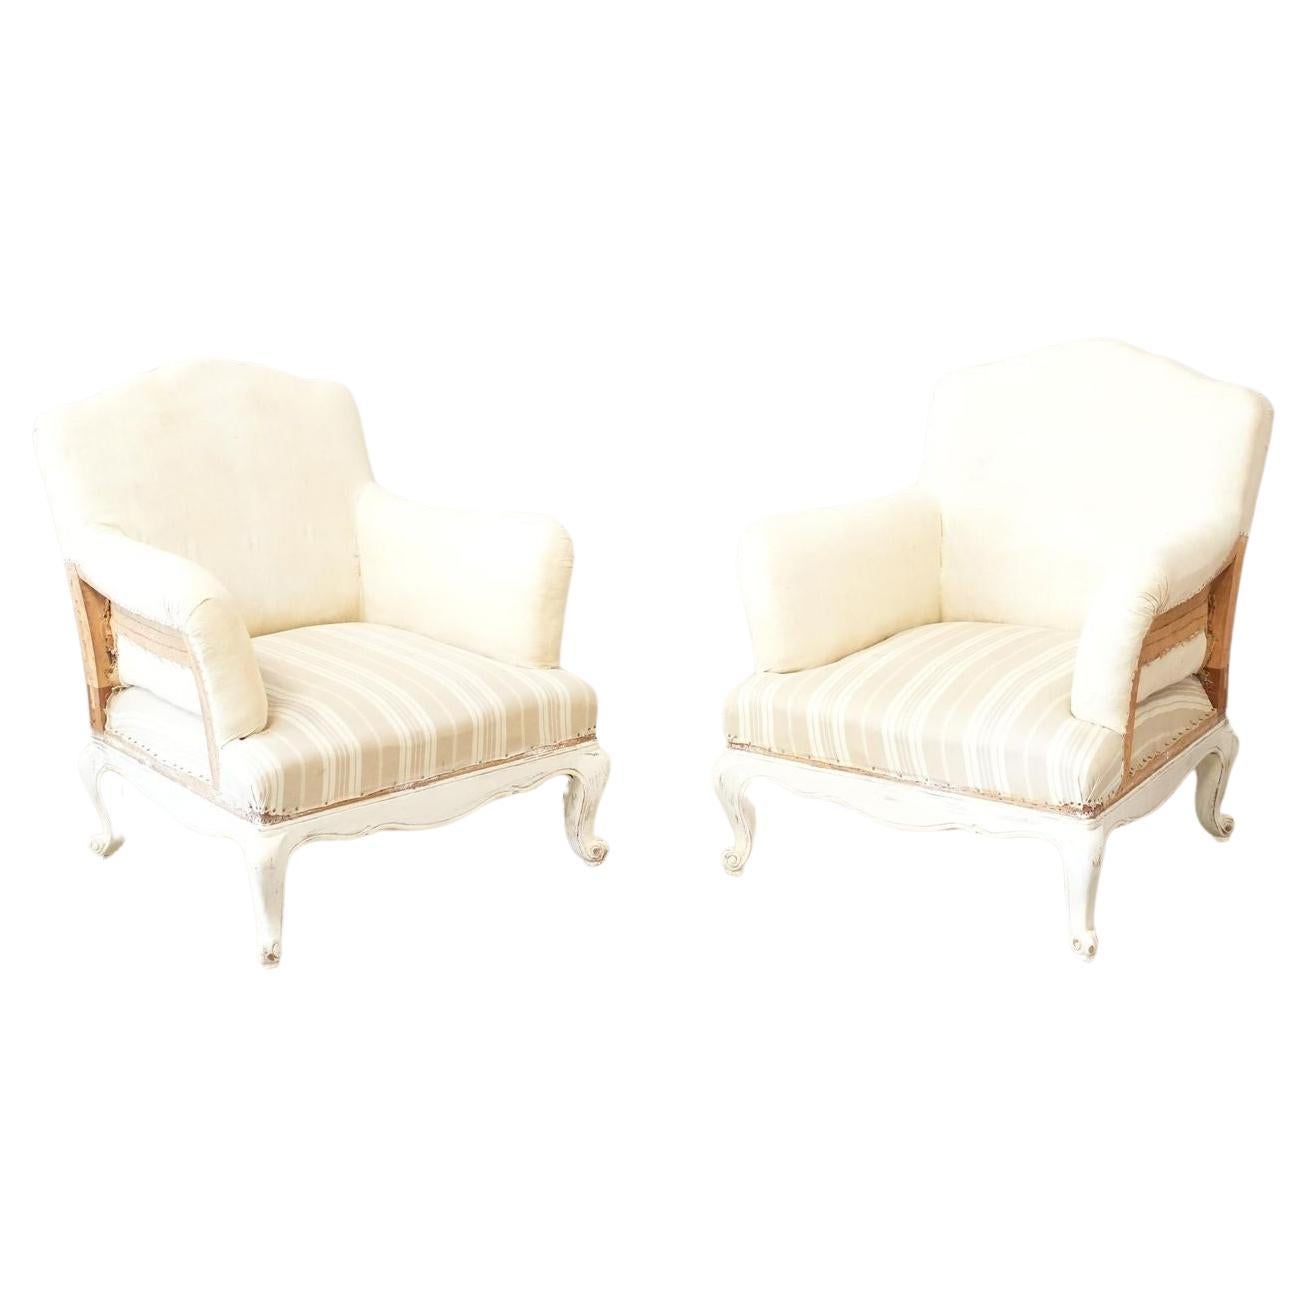 Pair of large French shield back armchairs with painted frame